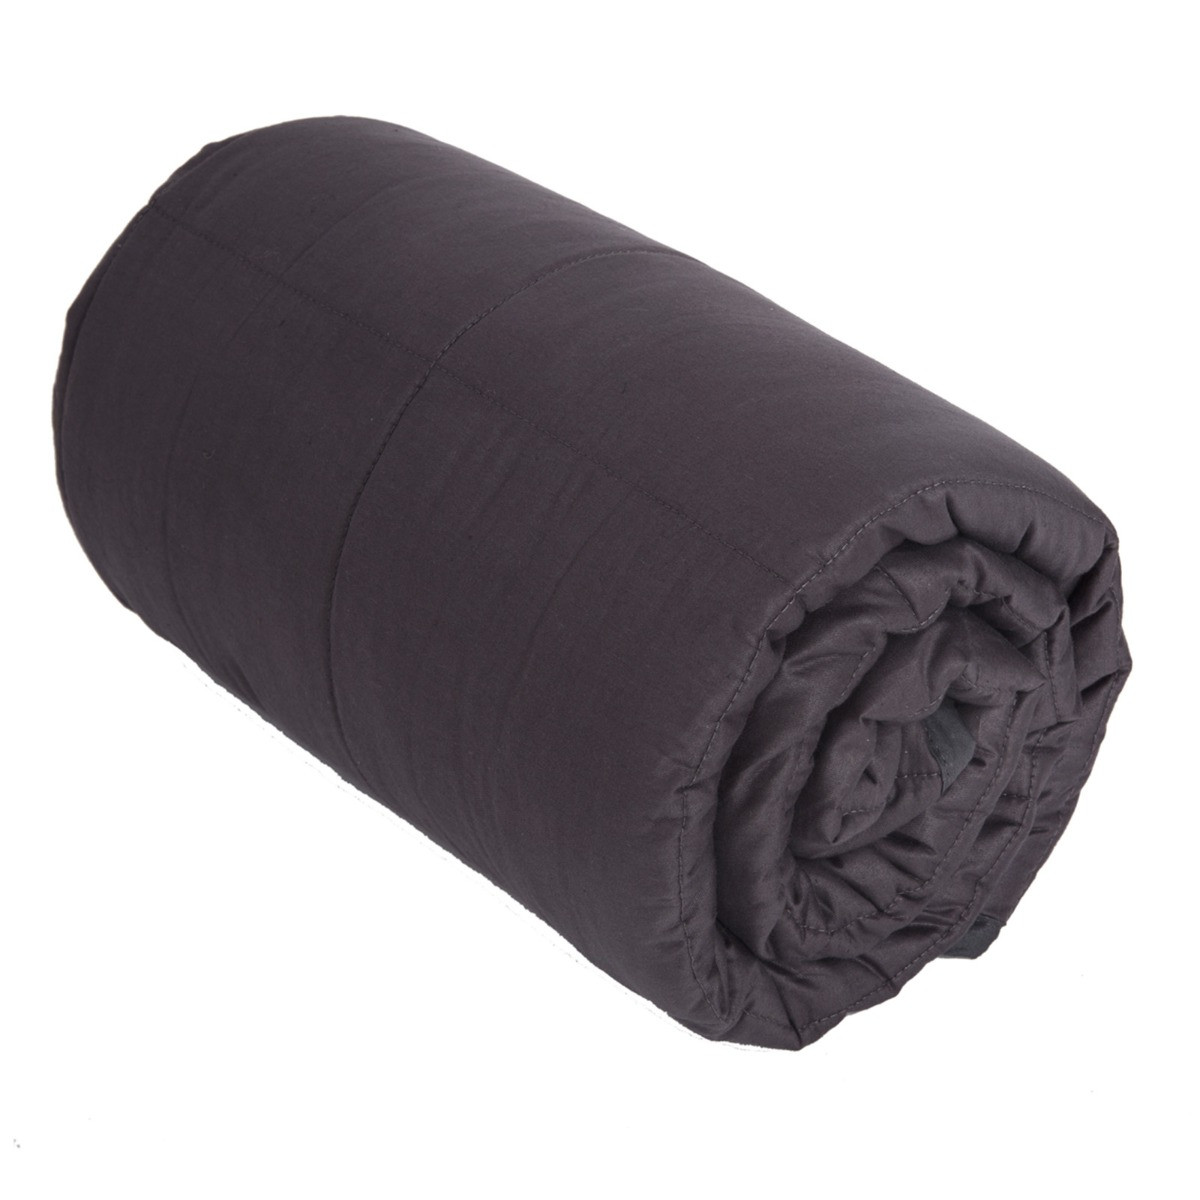 Highams Weighted Blanket for Sleep Therapy, 125 x 150cm - 4kg>